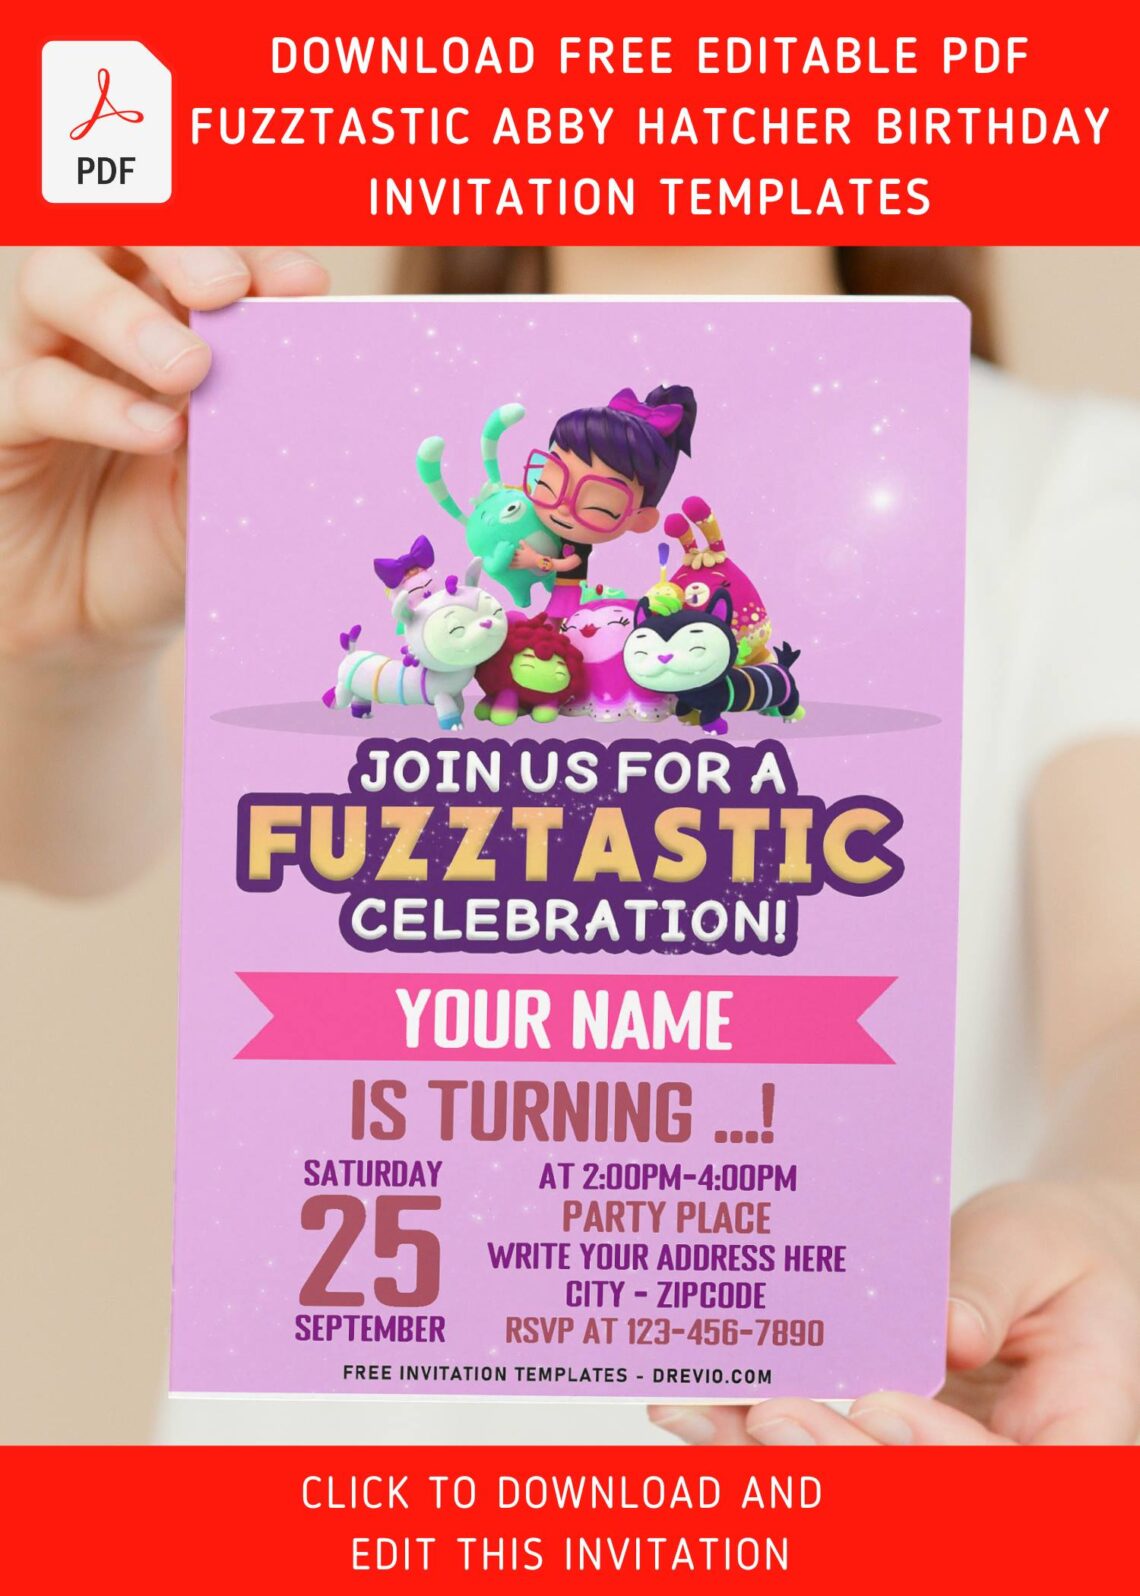 (Free Editable PDF) Fuzz-Tastic Abby Hatcher And Her Toy-Friends Birthday Invitation Templates with editable text